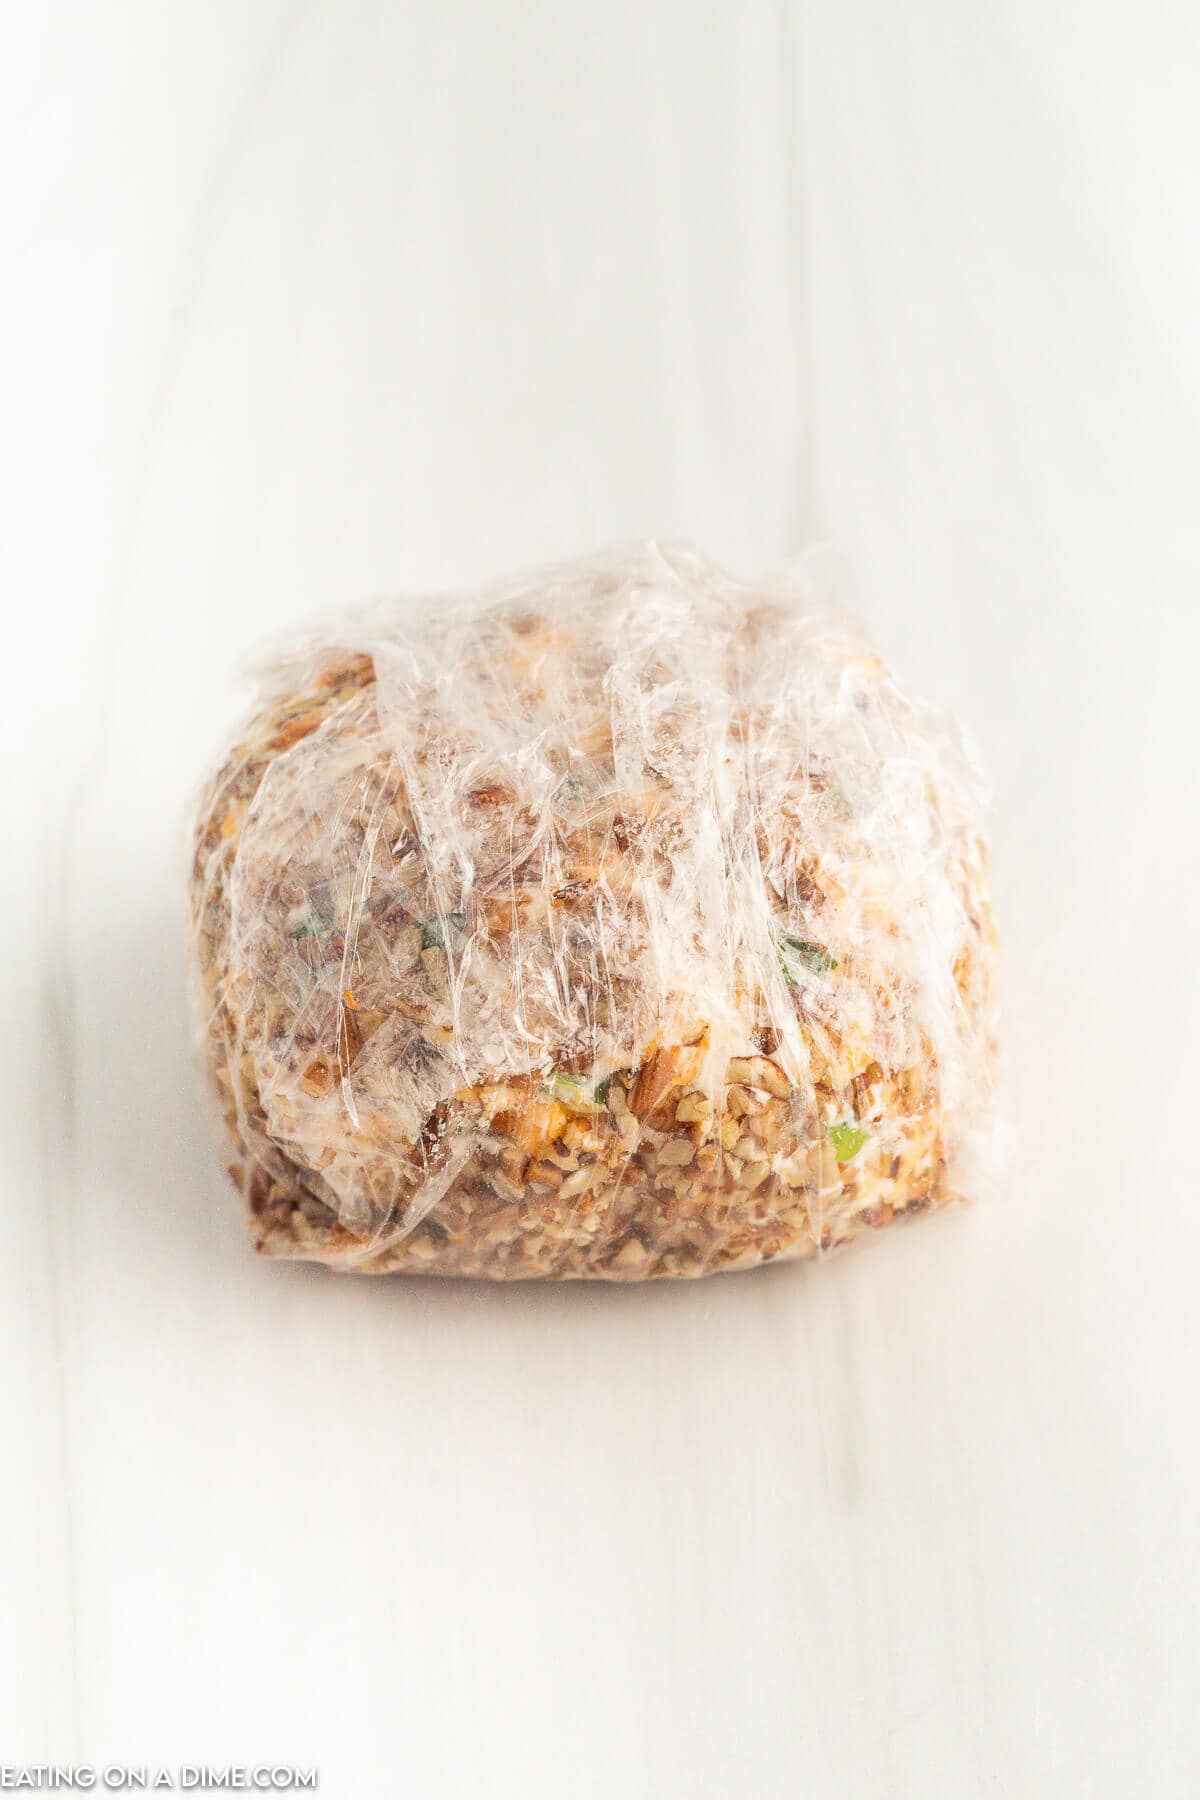 Cheese ball wrapped in plastic wrap and ready to serve